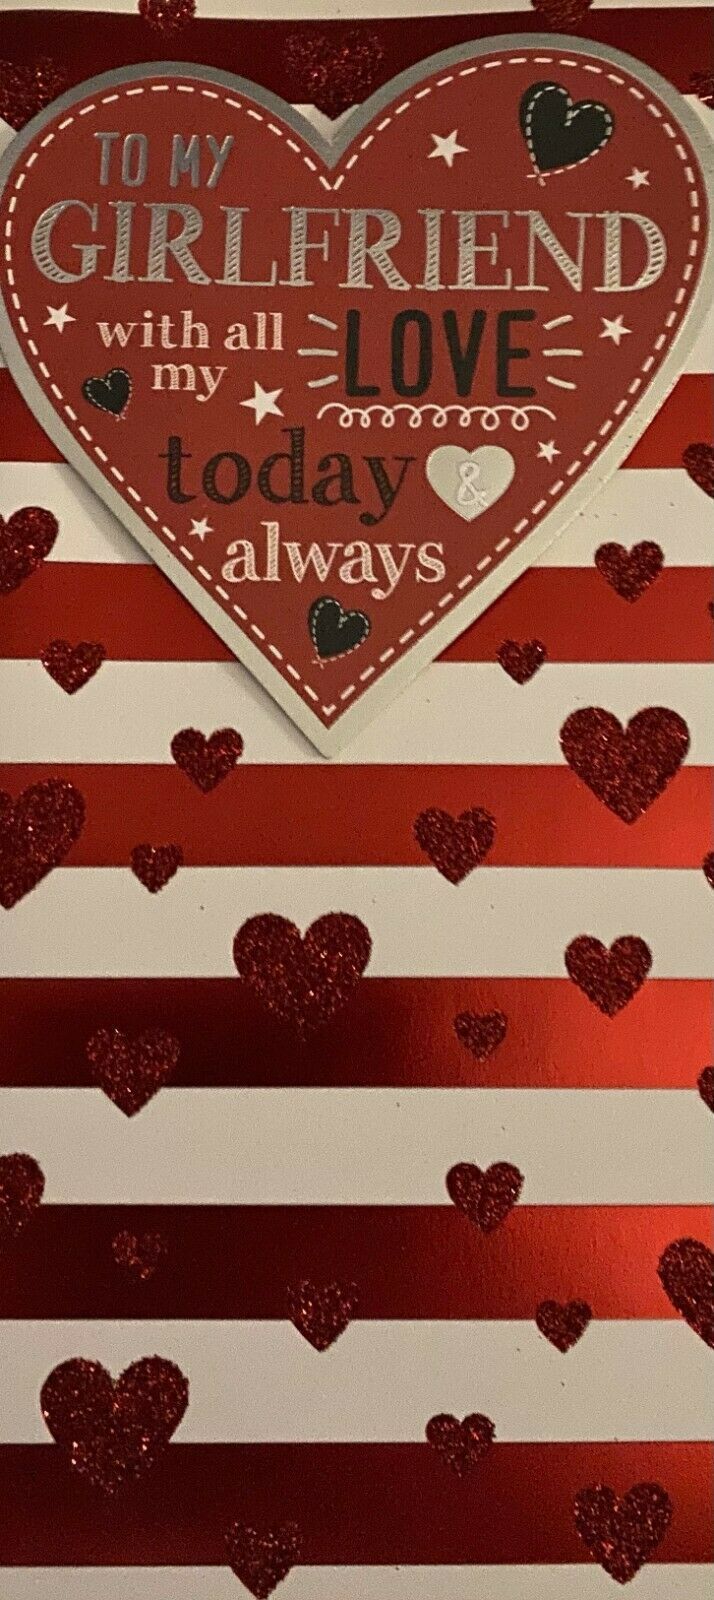 To My Girlfriend With All My Love Today & Always - Valentine's Day Card